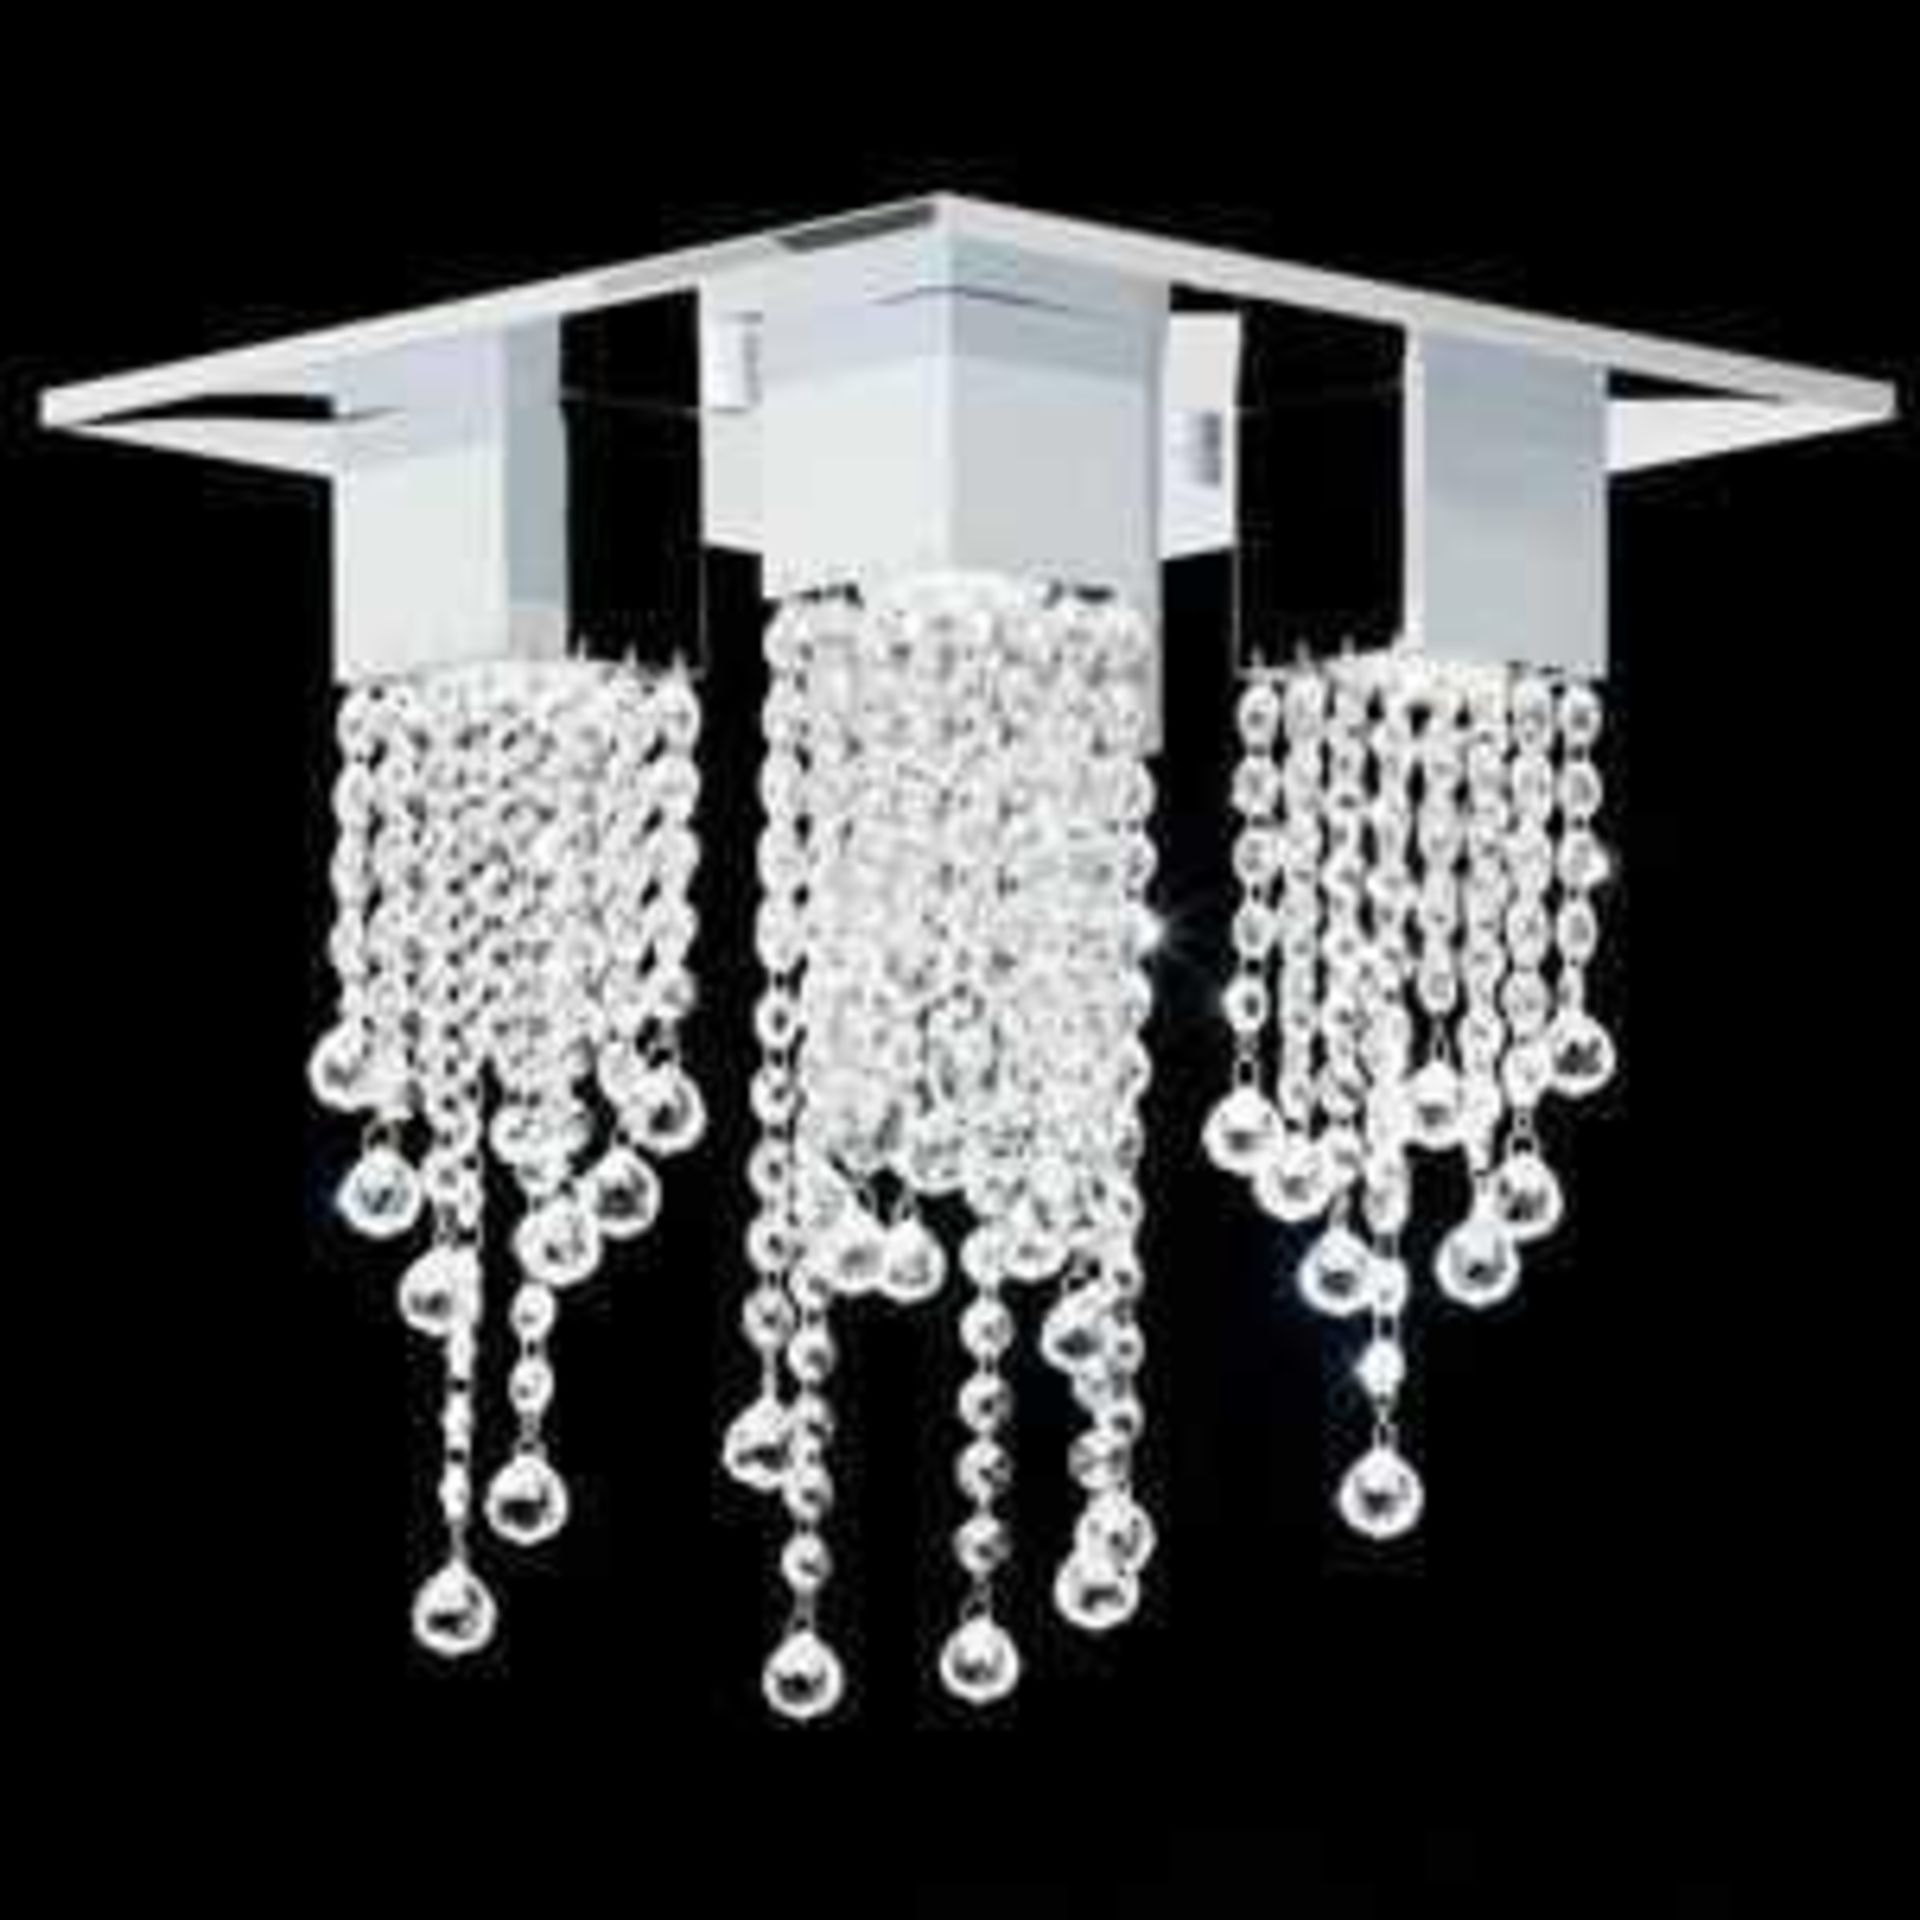 Rrp £120 Boxed Senza 4 Light Crystal Fitting Ceiling Light